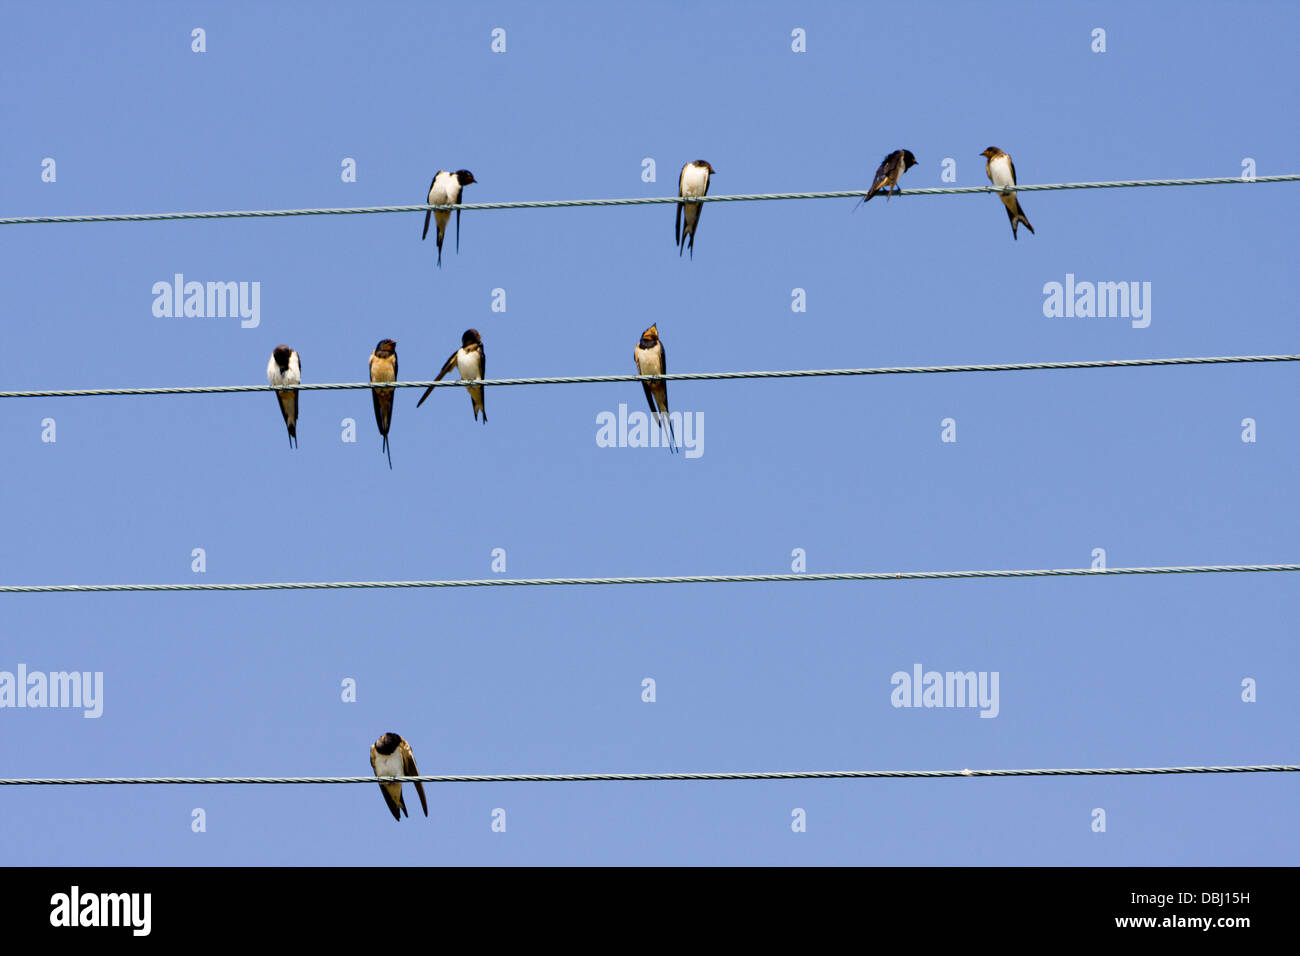 Swallows waiting on phone and power lines in Corfu Stock Photo